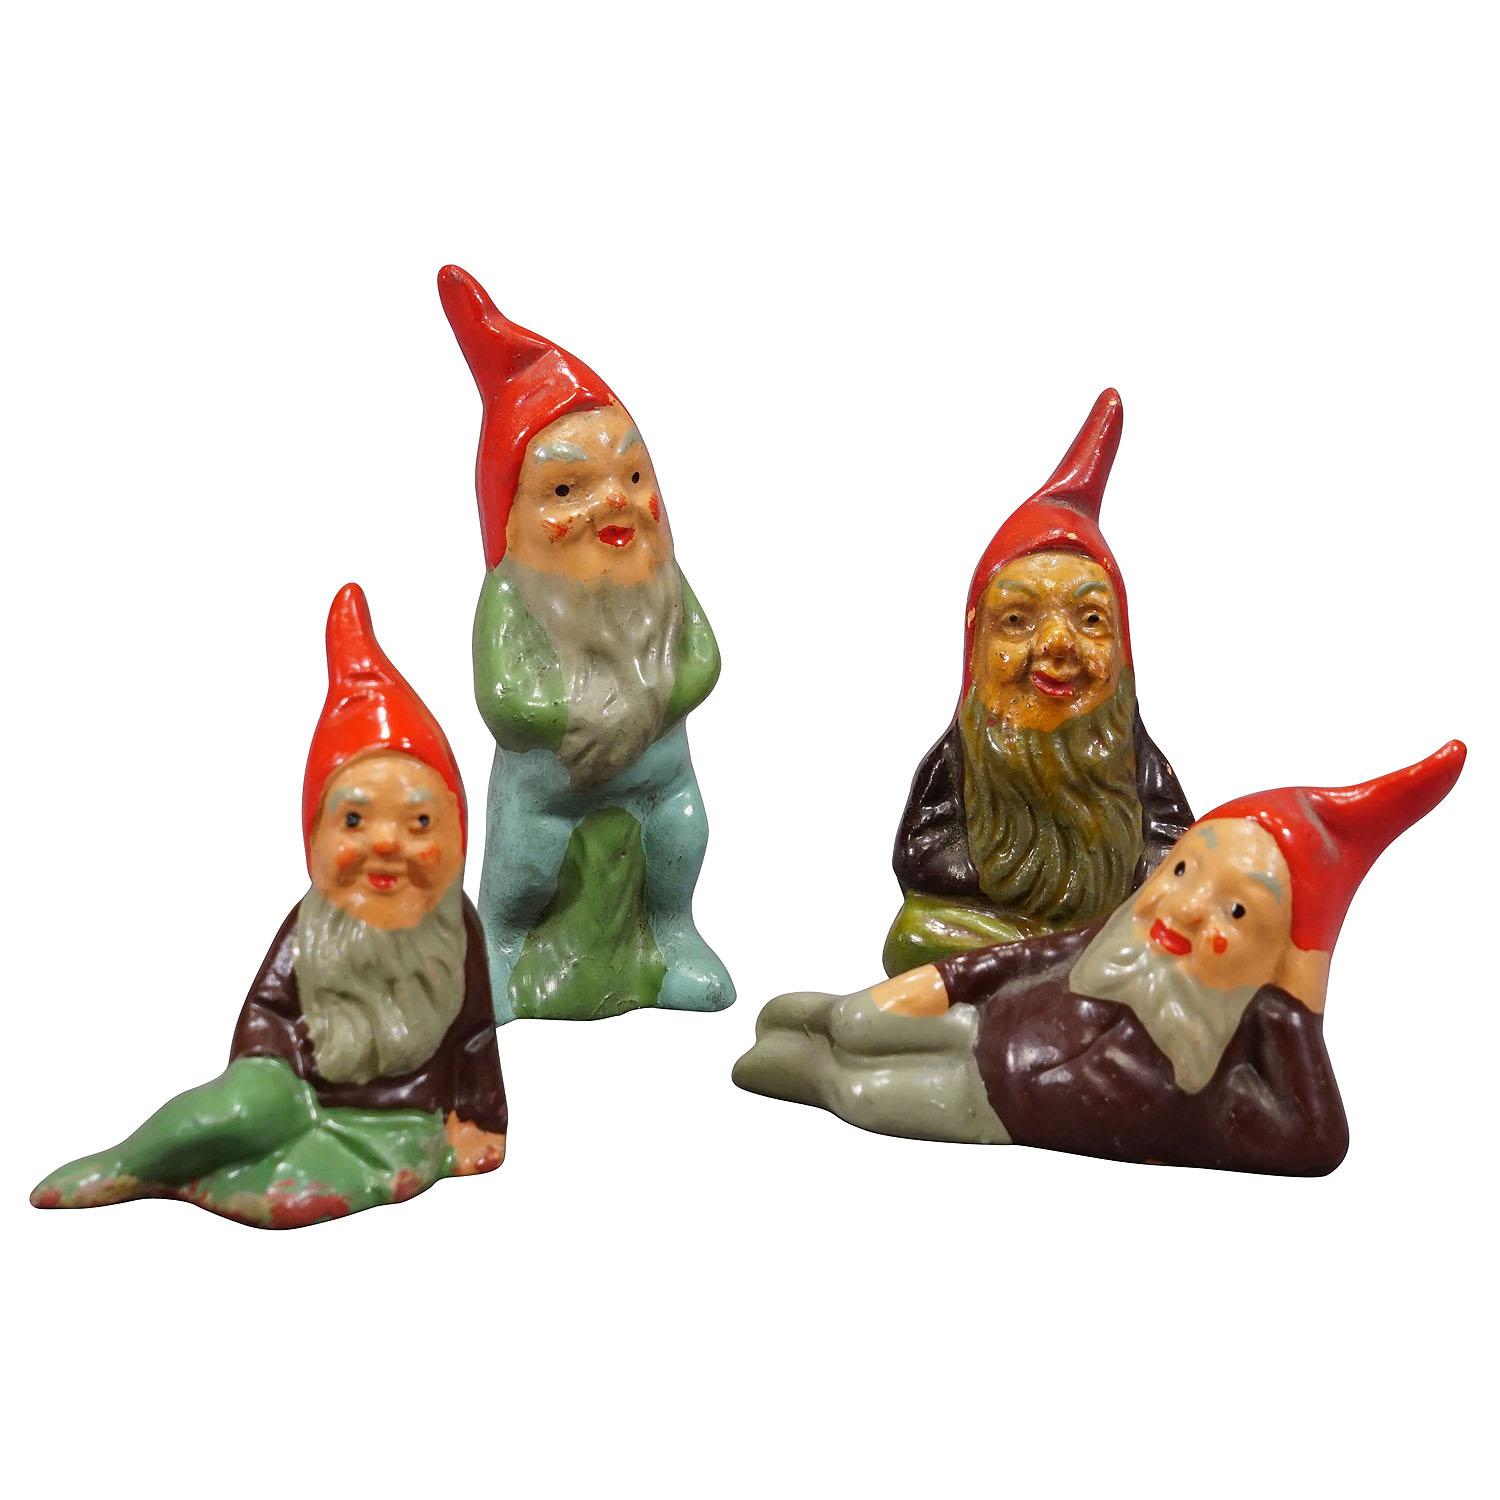 Lot of Four Tiny Terracotta Garden Gnomes, Germany ca. 1950s

A whimsy set of four tiny garden gnomes made in Germany ca. 1950s probably by Heissner. They are made of terracotta and hand-painted with bright colors. Good used vintage condition with